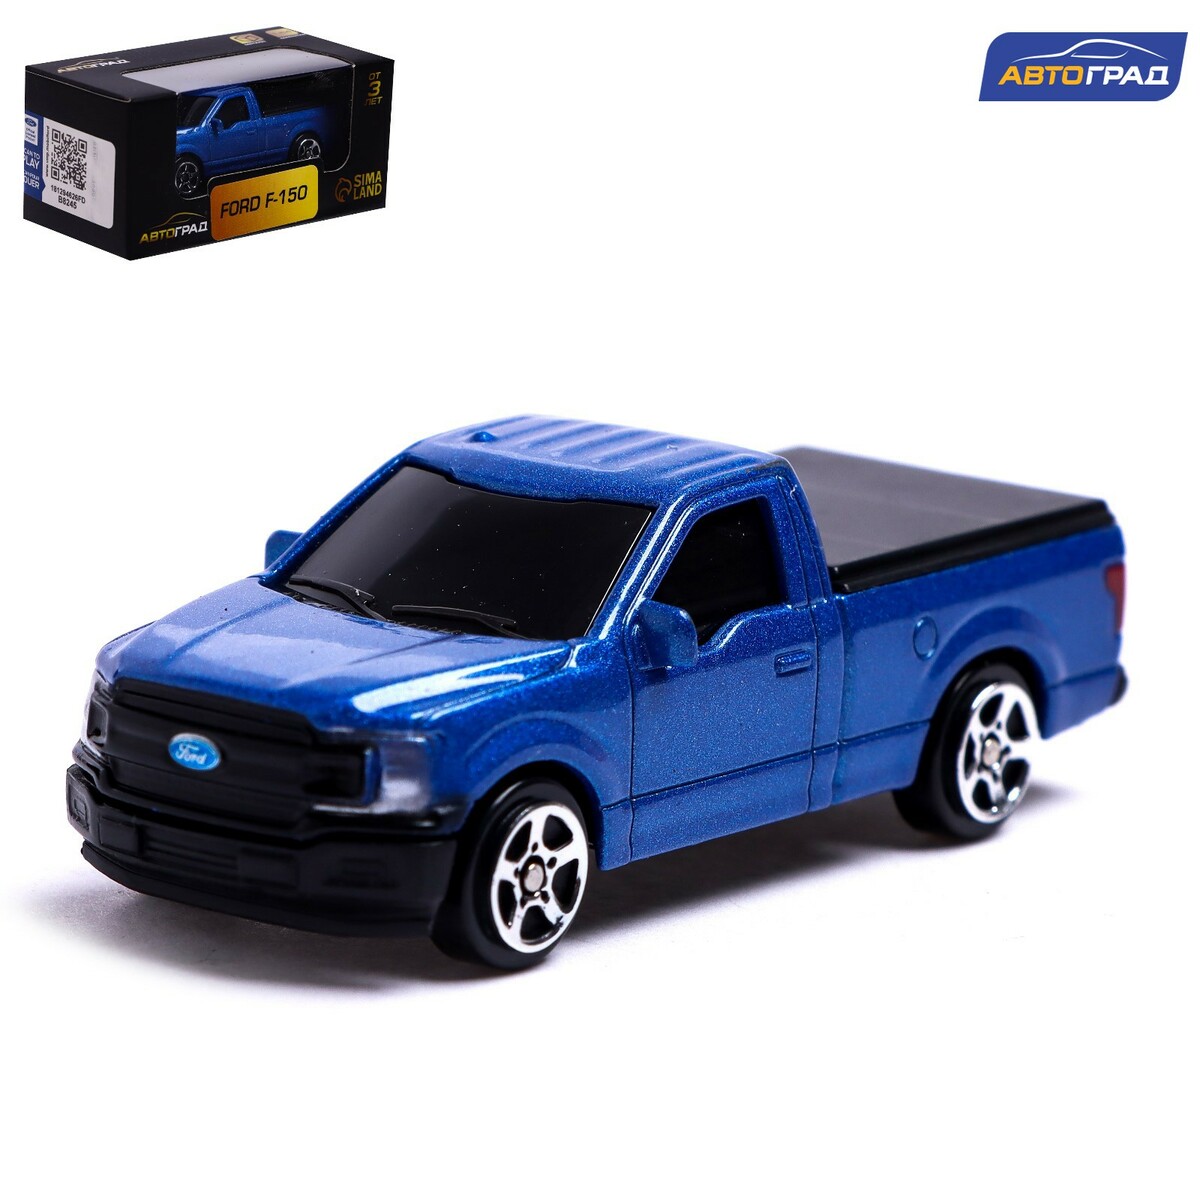   ford f-150, 1:64,  